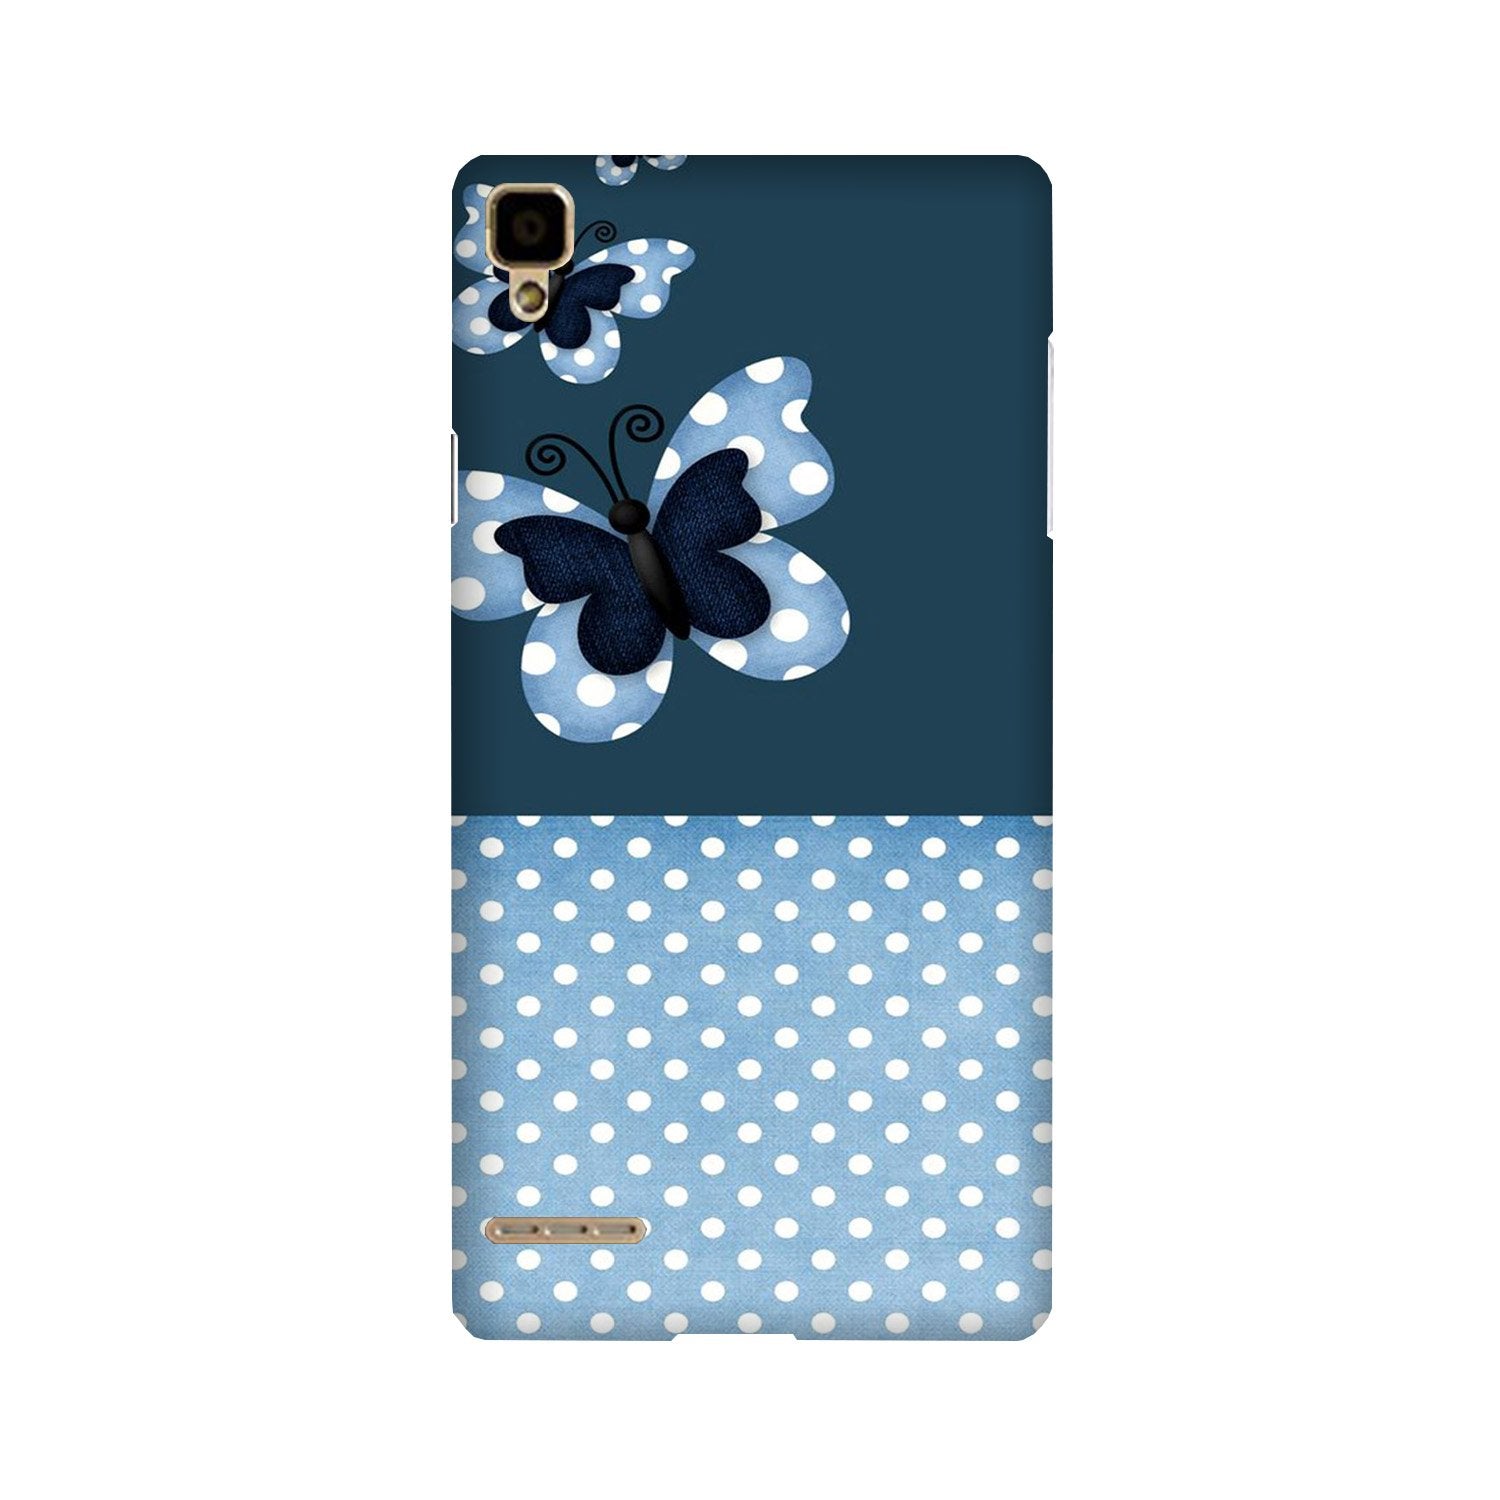 White dots Butterfly Case for Oppo F1